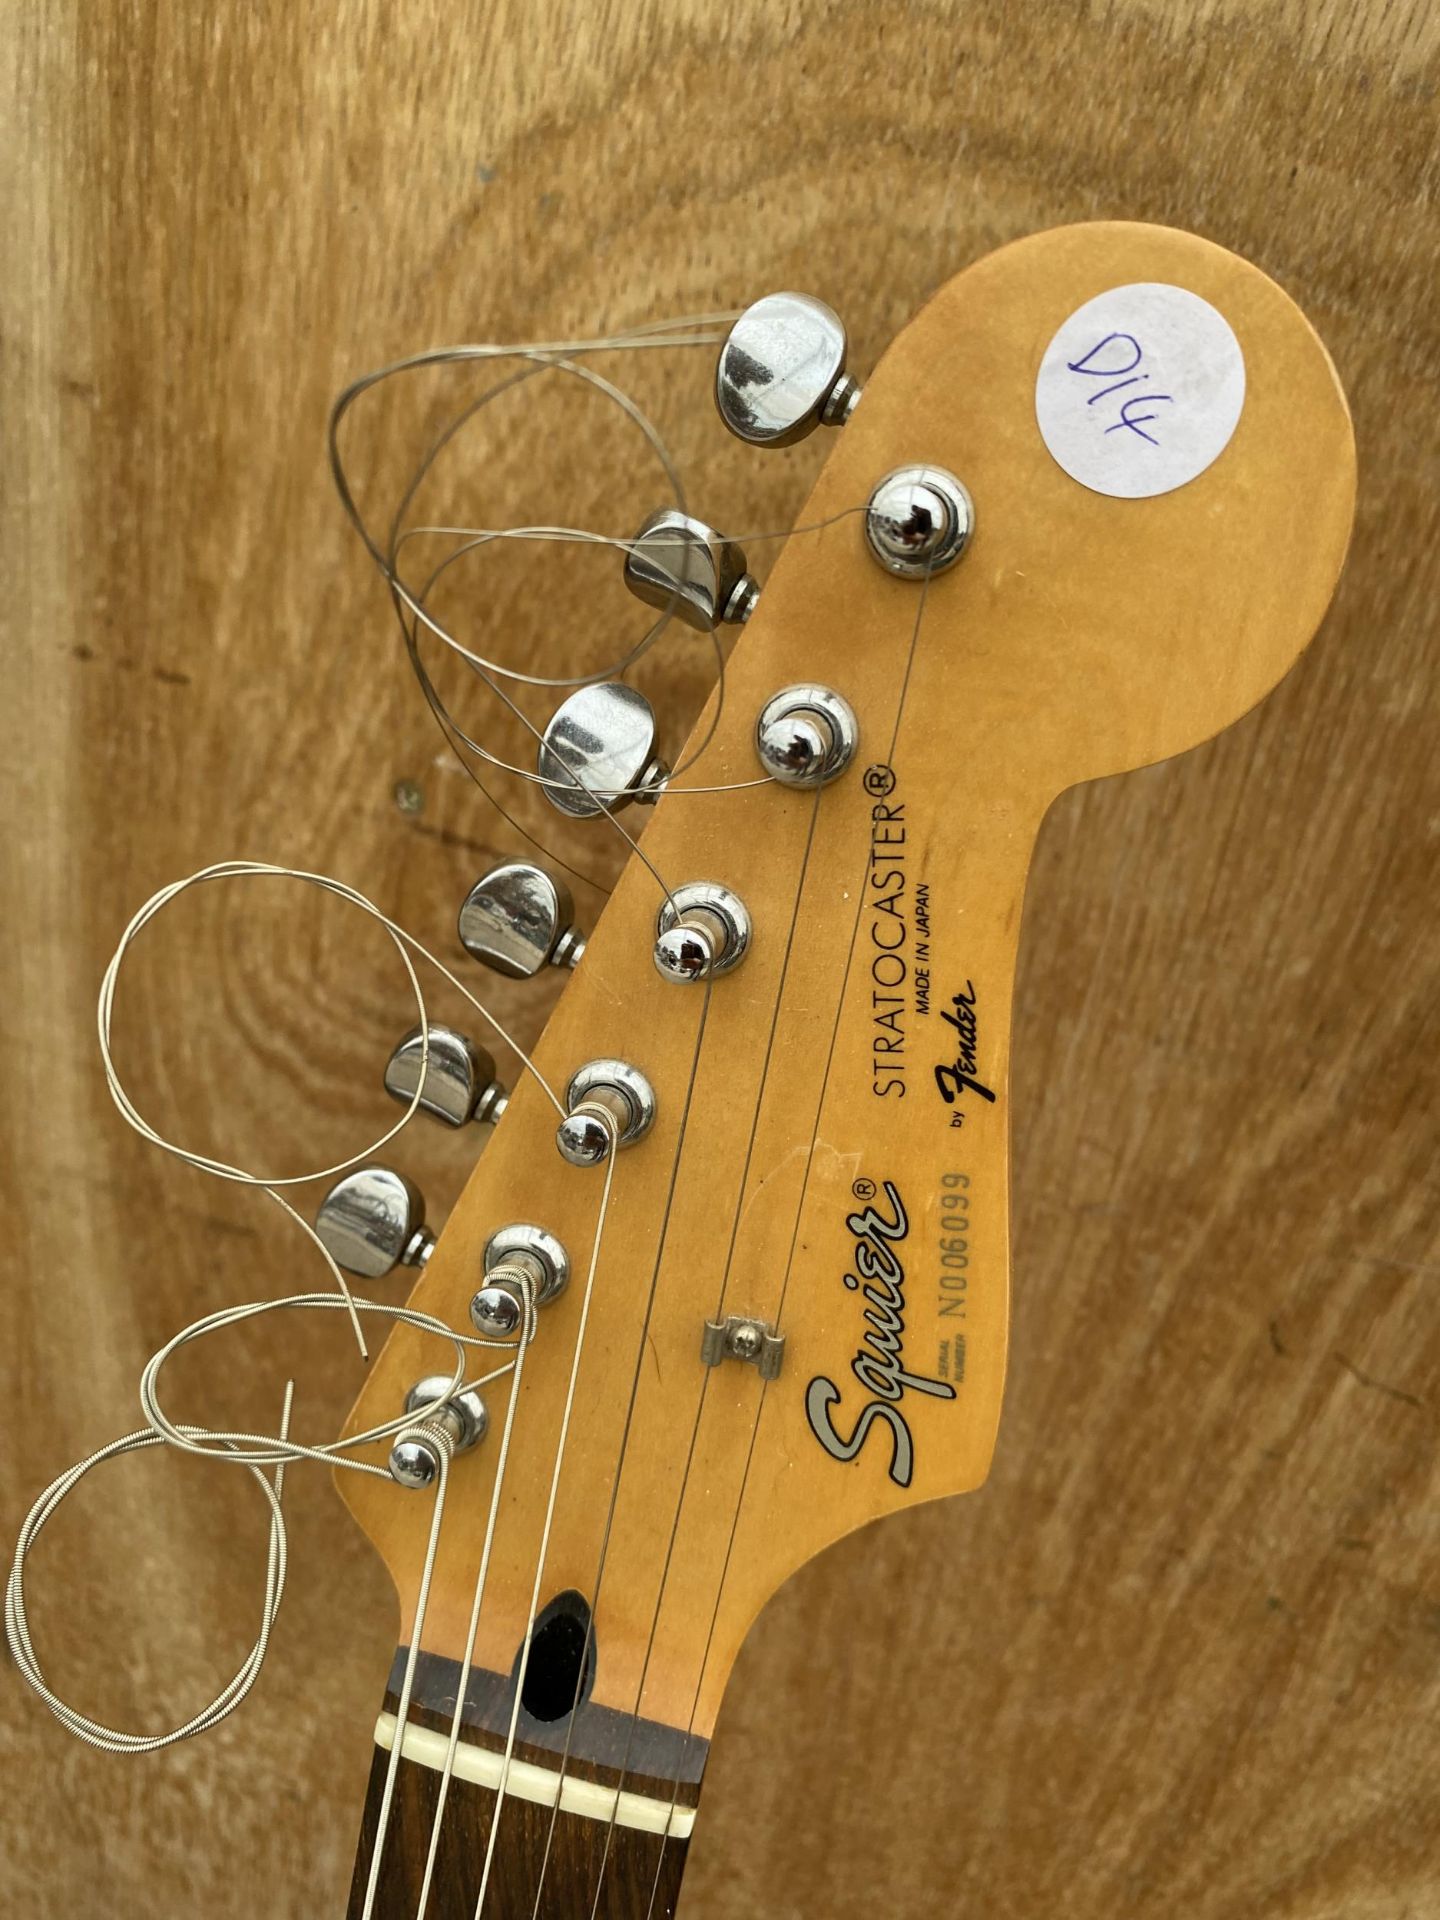 A BLACK SQUIRE STRATOCASTER BY FENDER ELECTRIC GUITAR (SERIAL NUMBER: N006099) - Image 3 of 4